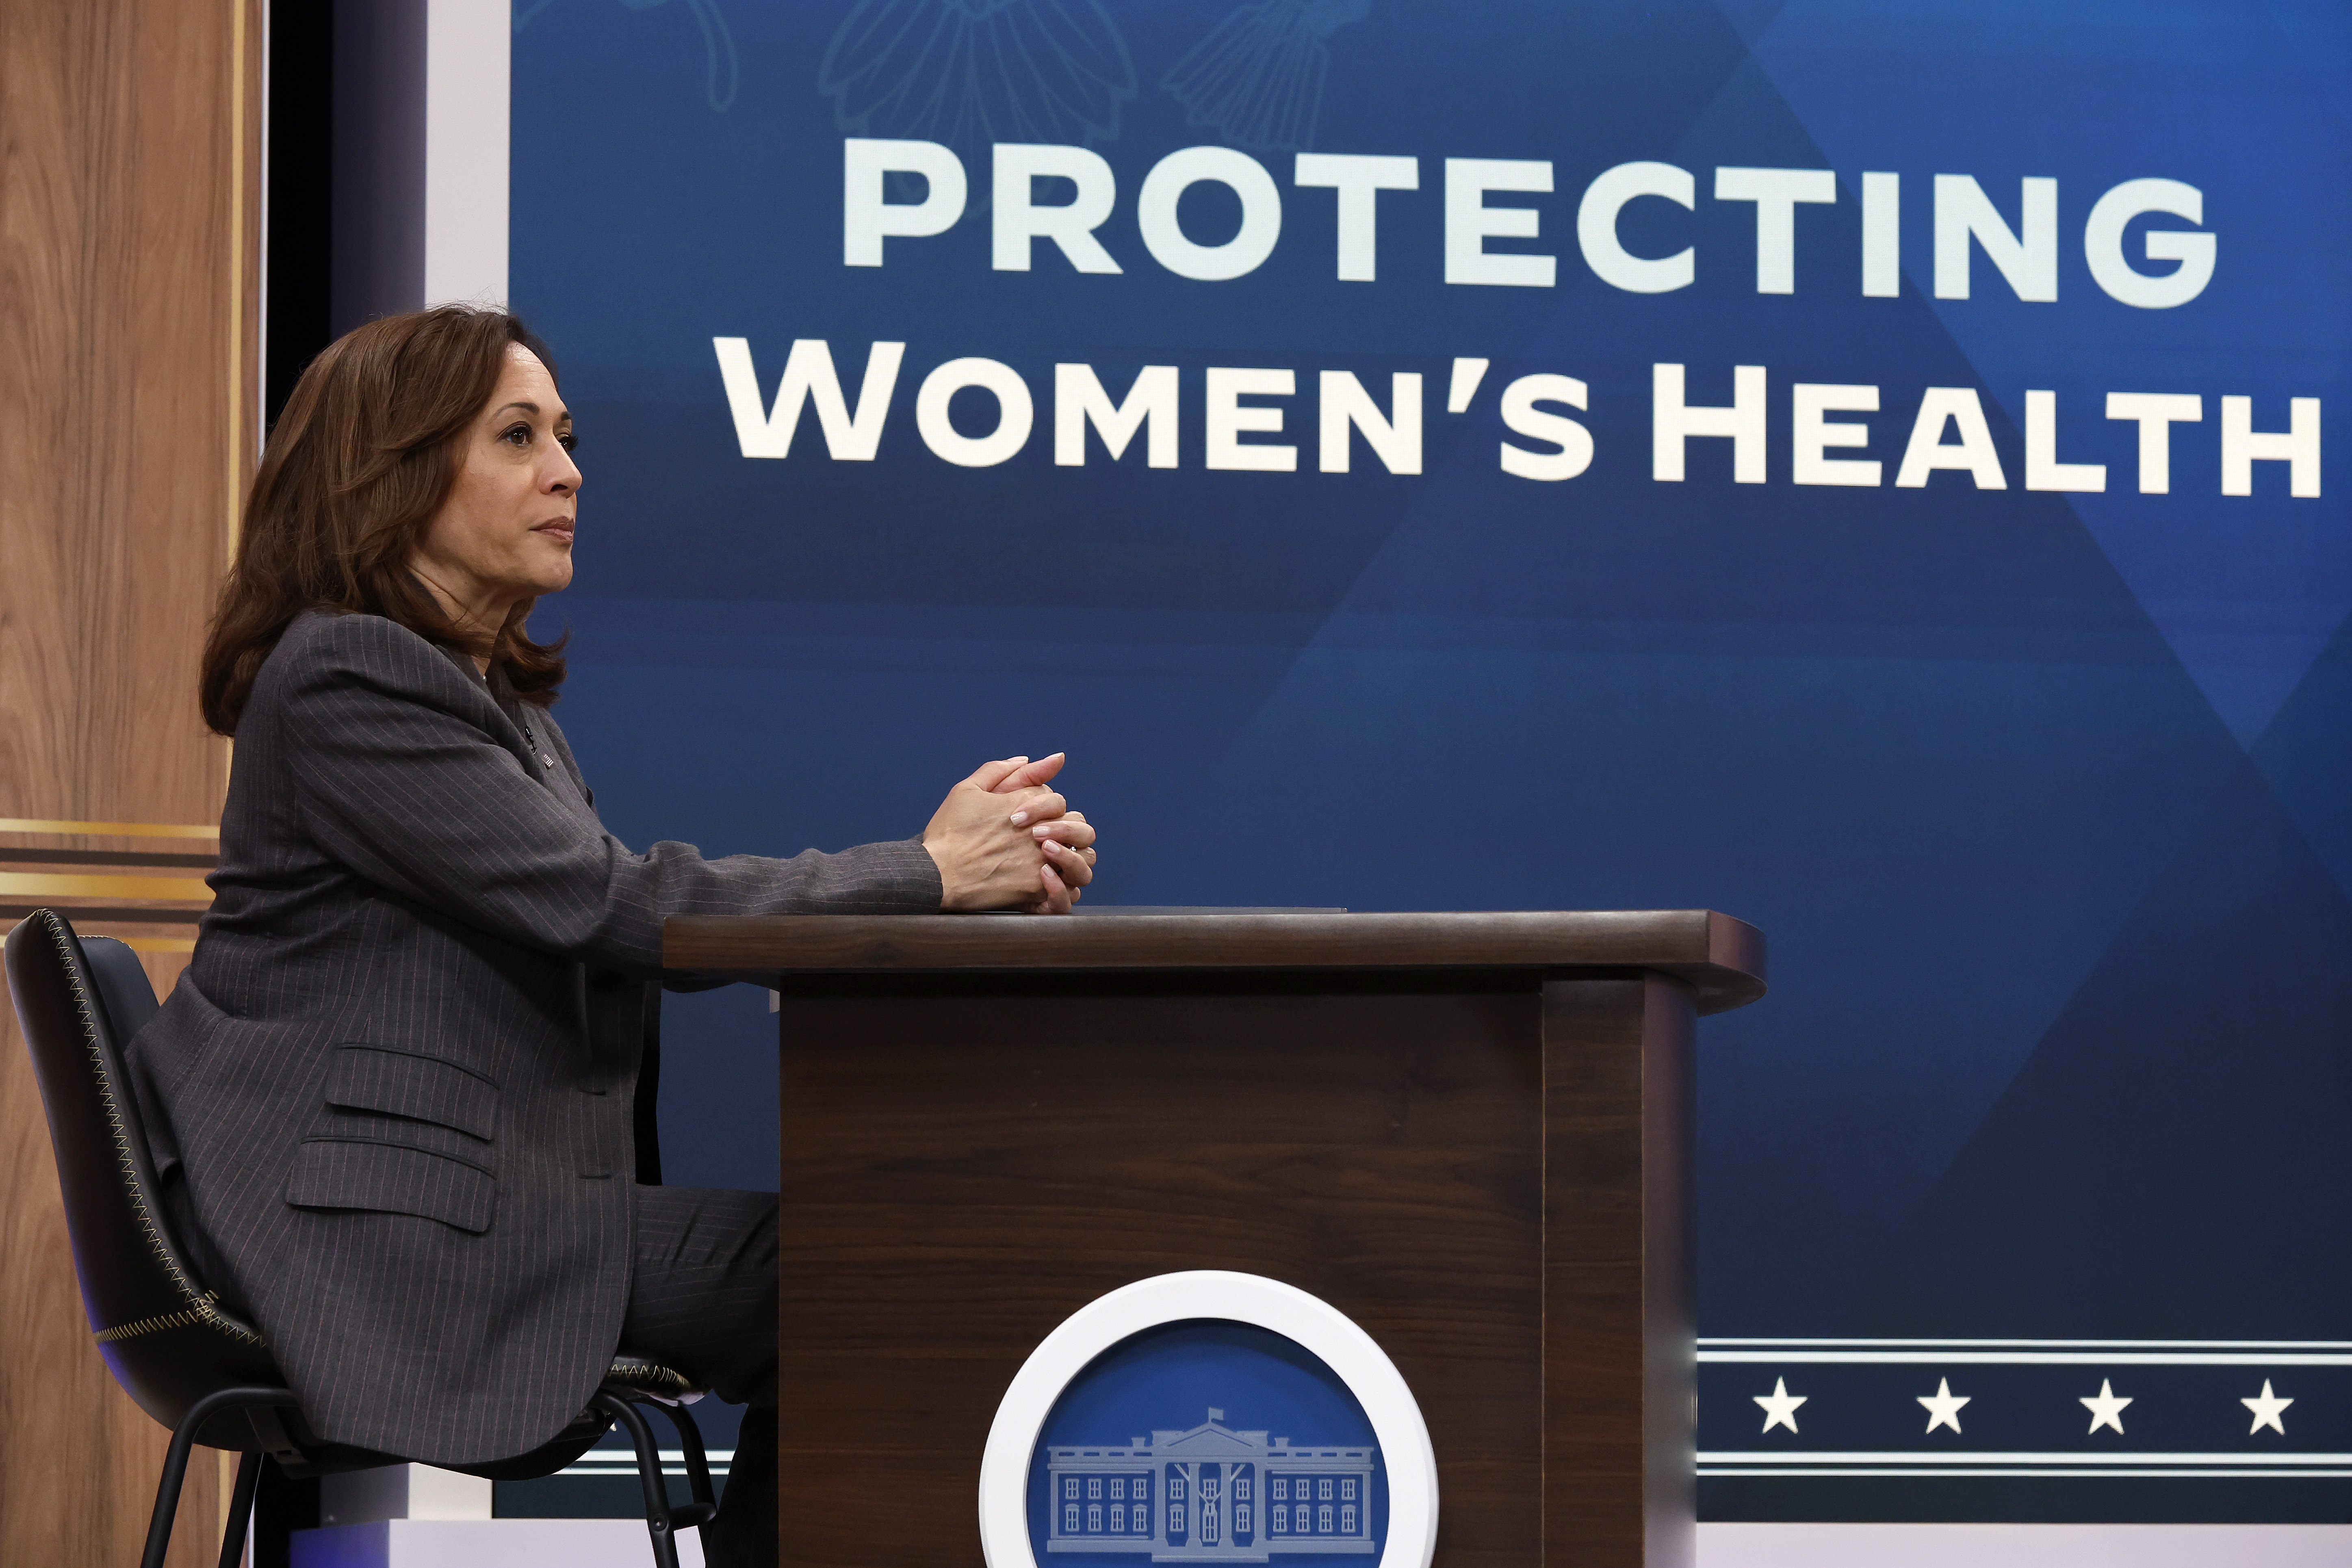 Kamala Harris delivers remarks in front of a sign that says PROTECTING WOMEN'S HEALTH